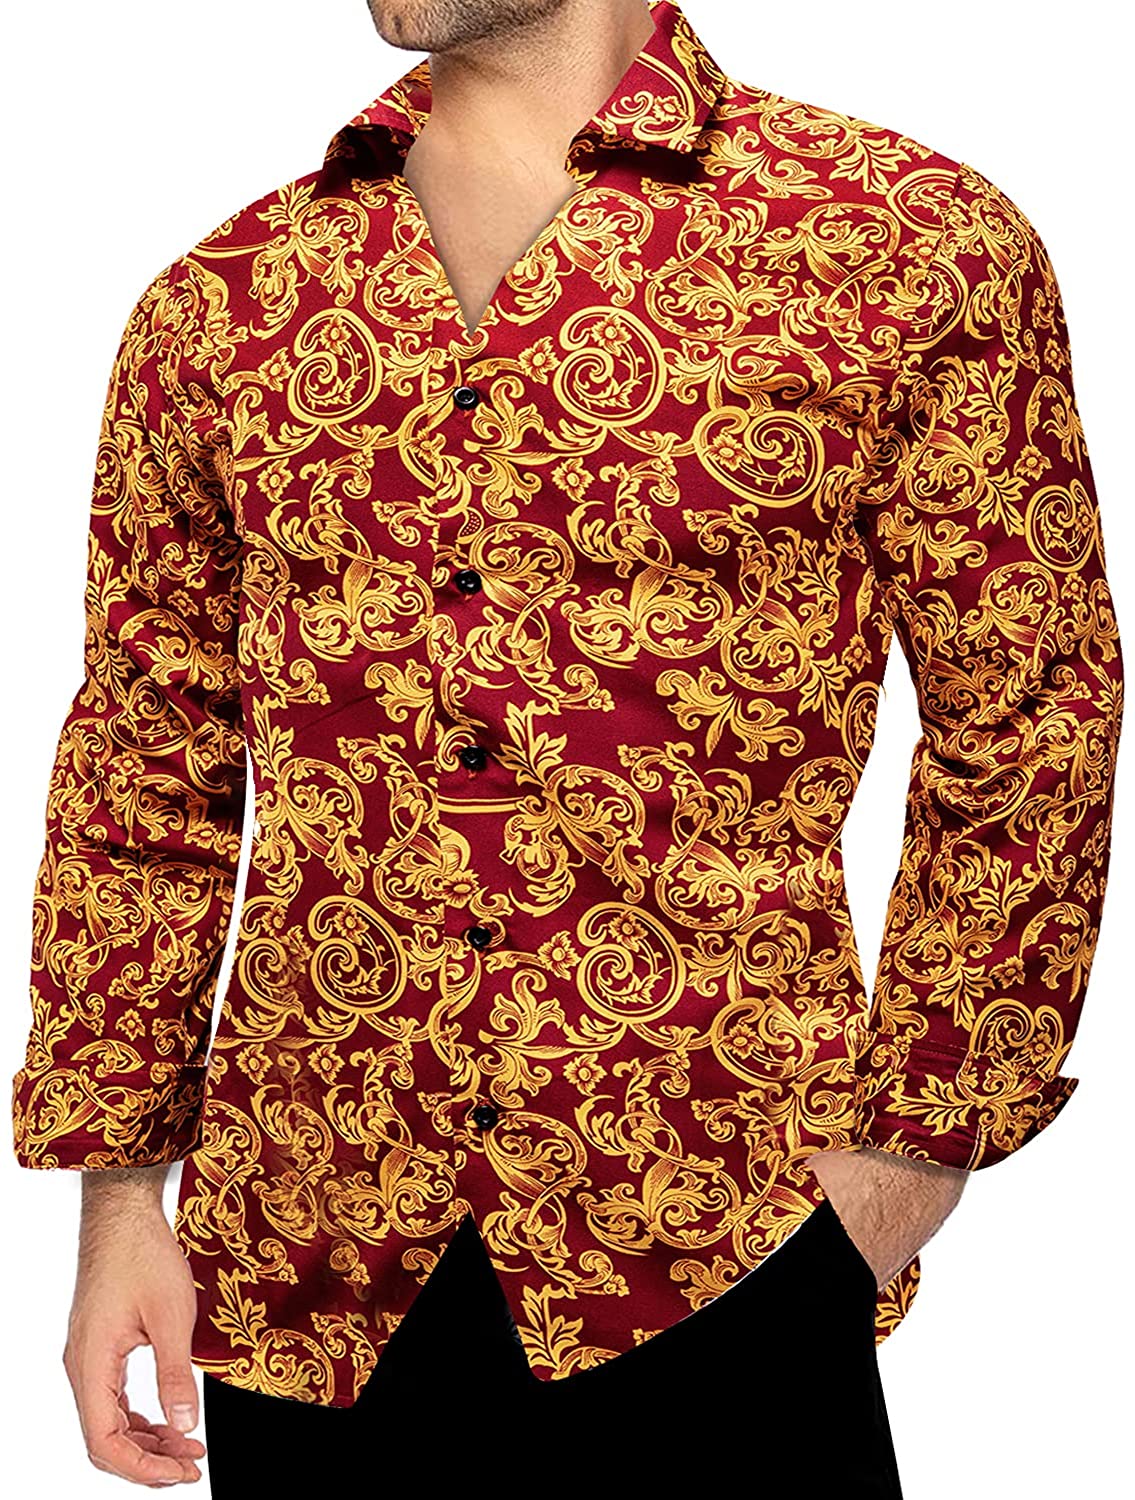 Dubulle Mens Dress Shirt Floral Paisley Long Sleeve Shirts for Men Casual Button Down Shirts Wedding Formal Suit 